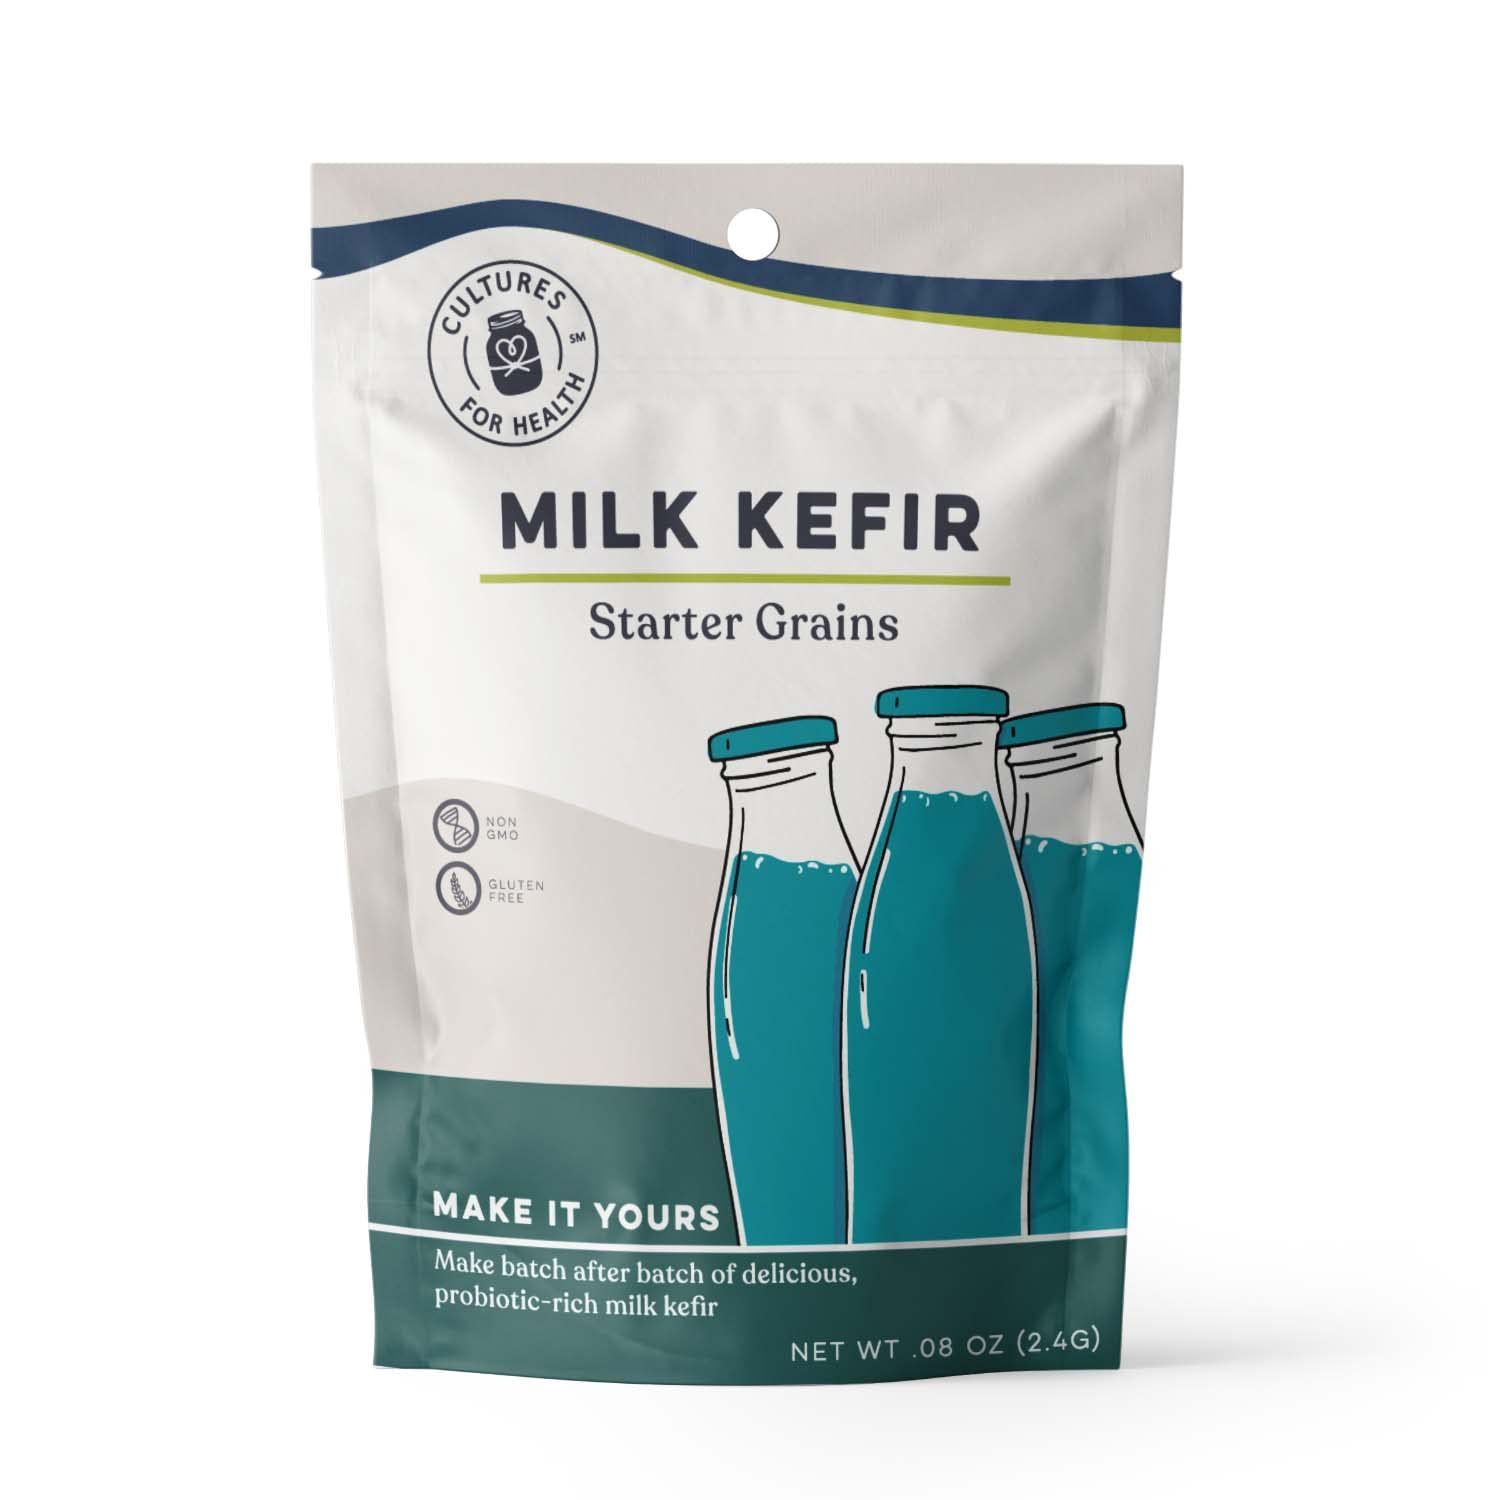 Cultures for Health Milk Kefir Grains | DIY Frothy Dairy Non-GMO Probiotic Drink for Stronger Gut Health | Limitless Heirloom Style Starter | Easy to Flavor or Add to Recipes | Bulgaros De Leche